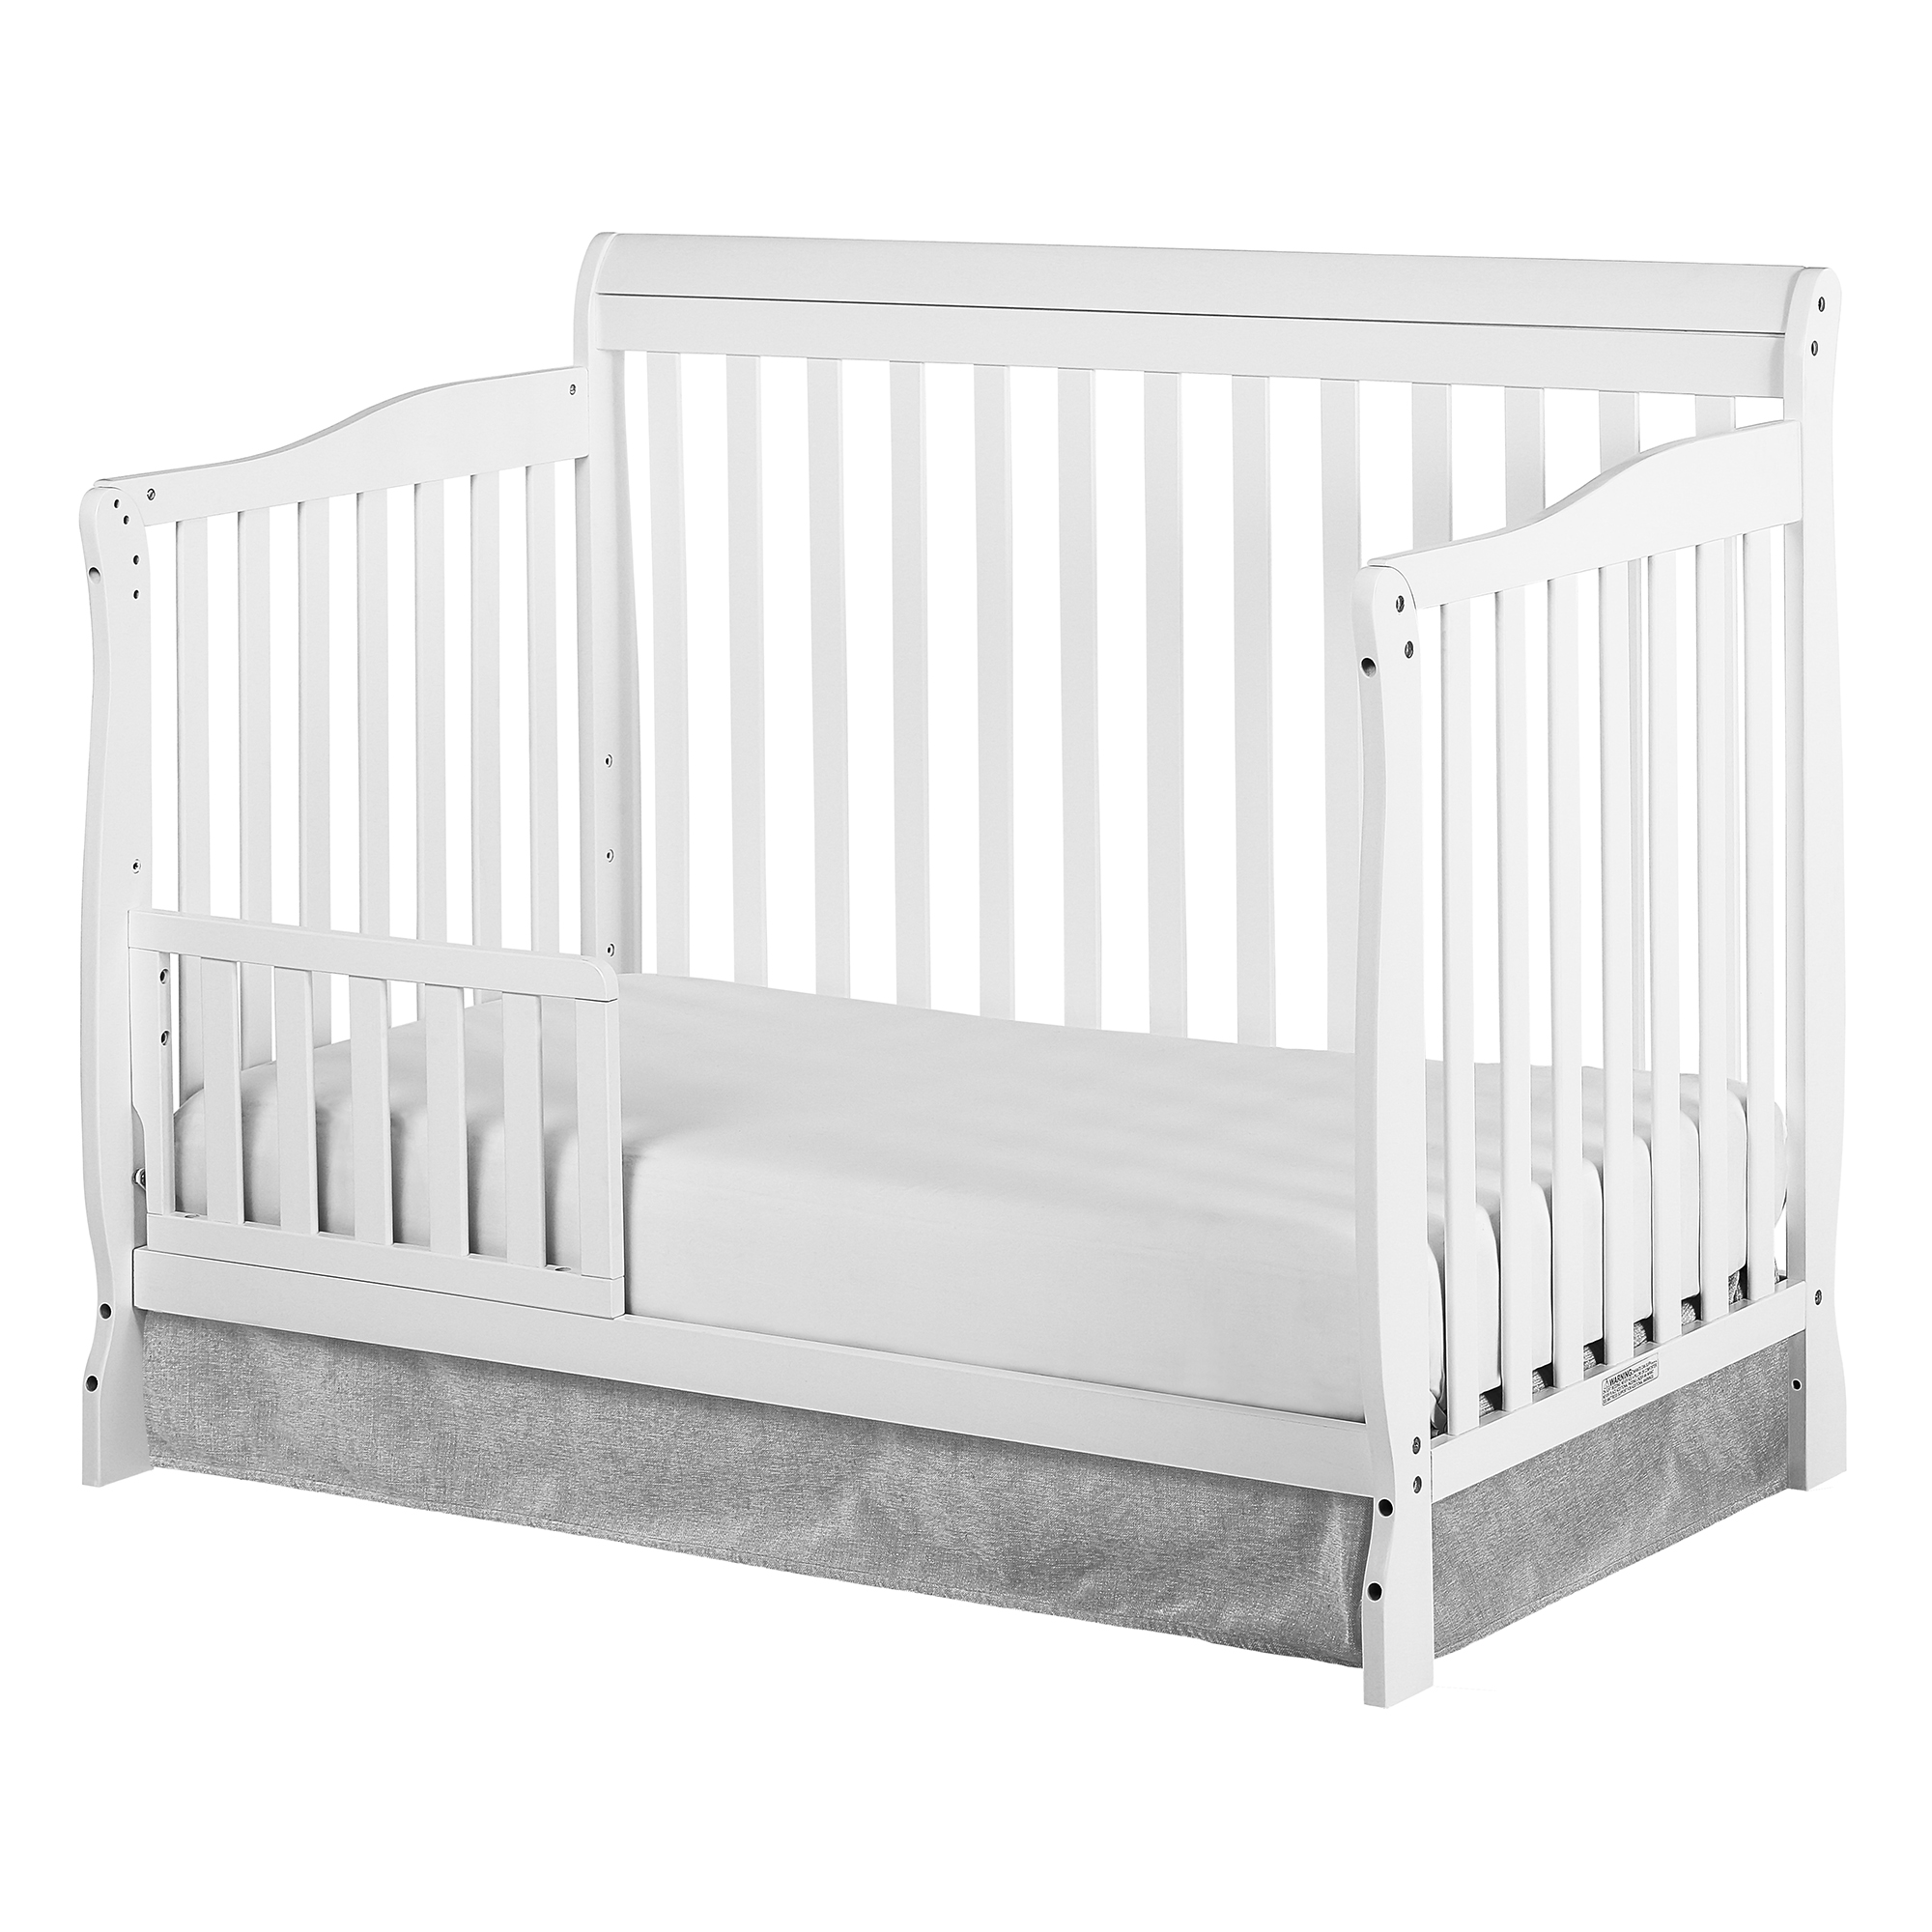 Dream On Me Ashton 5-in-1 Convertible Crib, White, Greenguard Gold and JPMA Certified - image 3 of 14